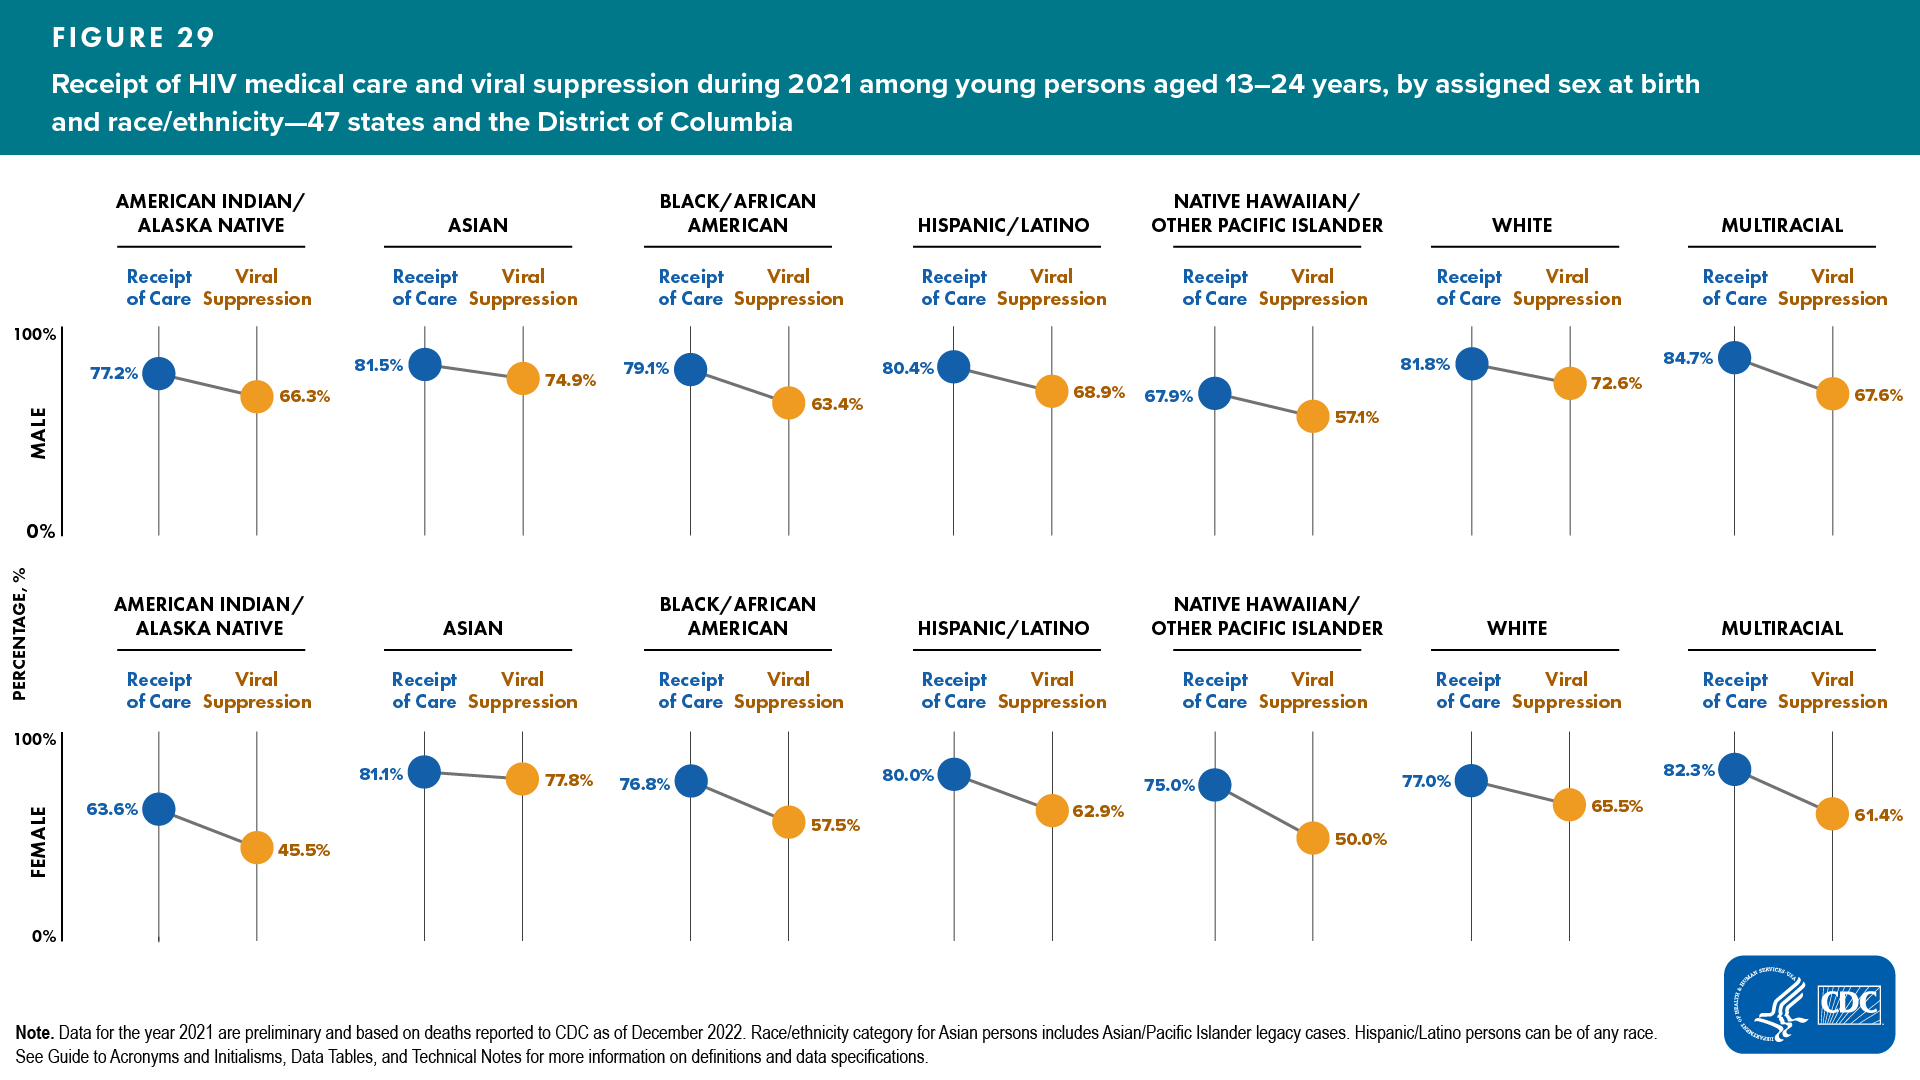 Figure 29. Receipt of HIV medical care and viral suppression during 2021 among young persons aged 13-24 years, by assigned sex at birth and race/ethnicity — 47 states and the District of Columbia